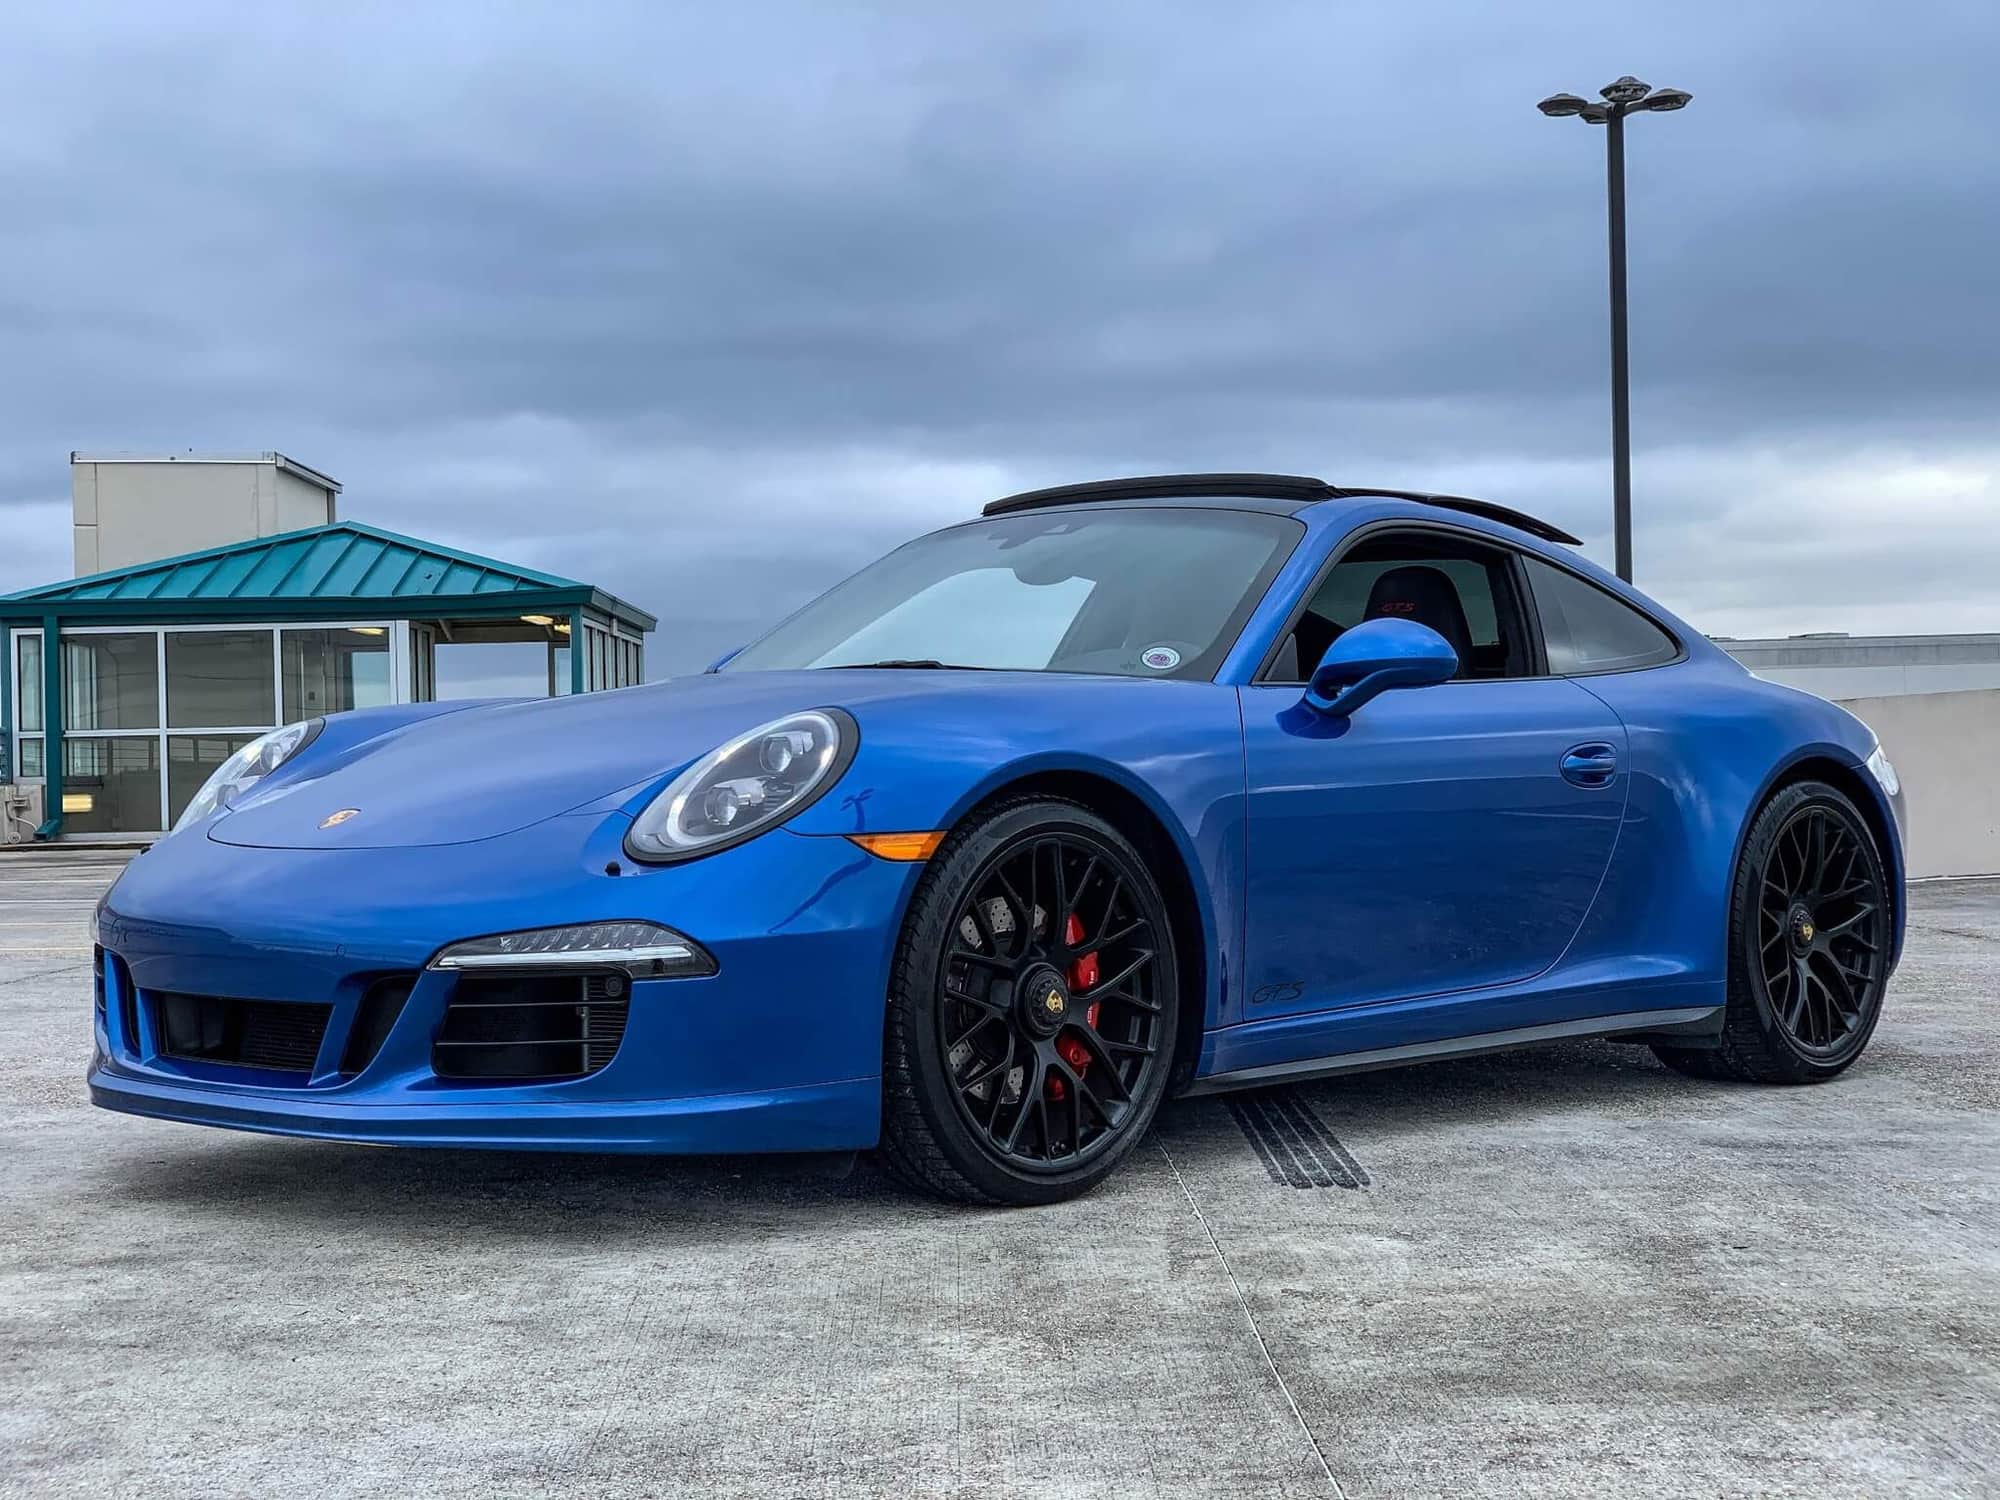 2015 - 2016 Porsche 911 - WTB: 991.1 C4 GTS Manual Coupe - Used - 6 cyl - AWD - Manual - Coupe - Oxford, MI 48371, United States